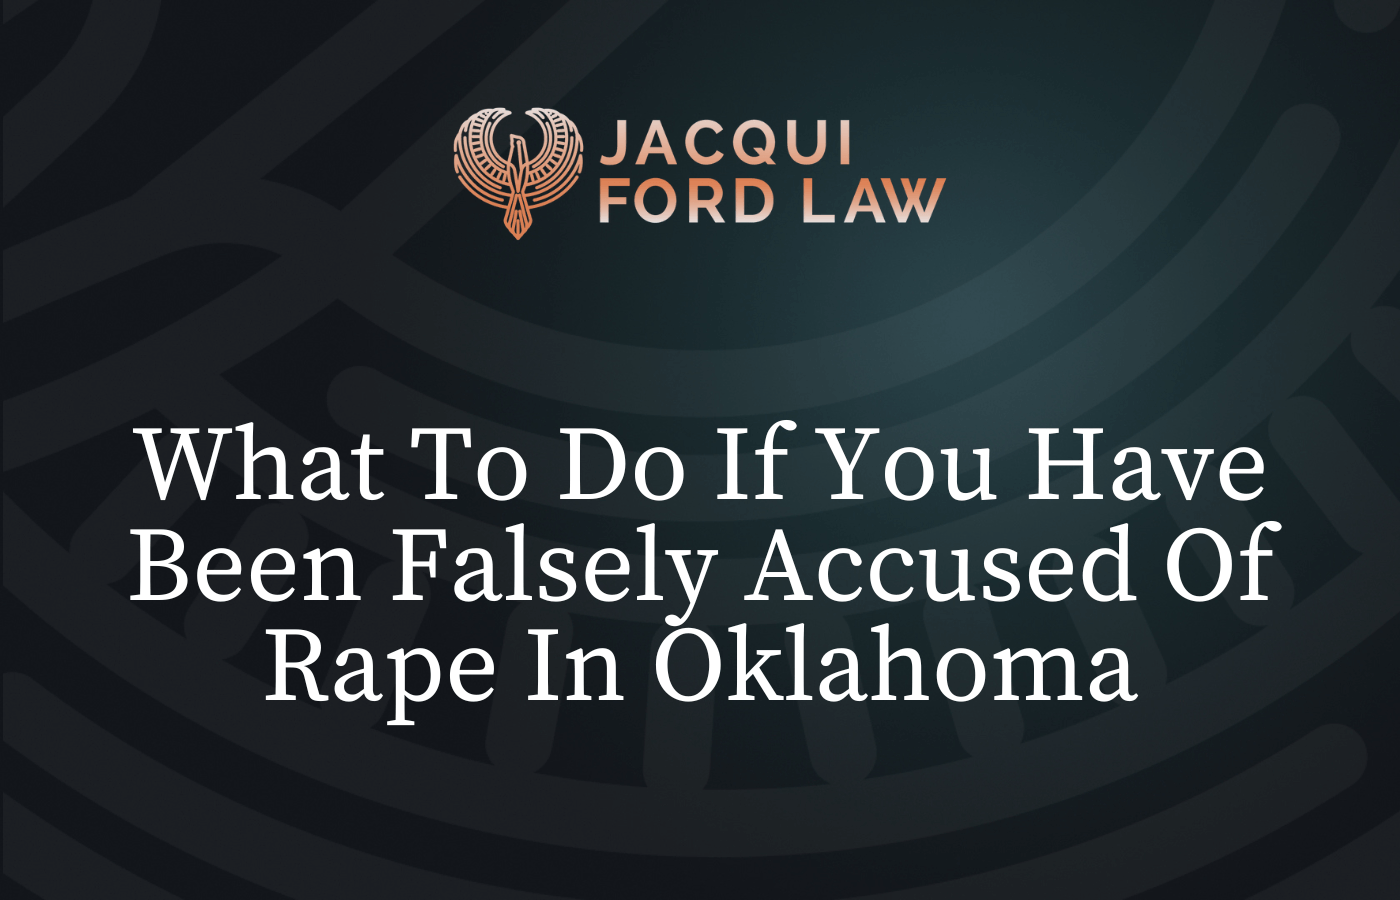 What To Do If You Have Been Falsely Accused Of Rape In Oklahoma - Jacqui Ford Law Oklahoma City Criminal Defense